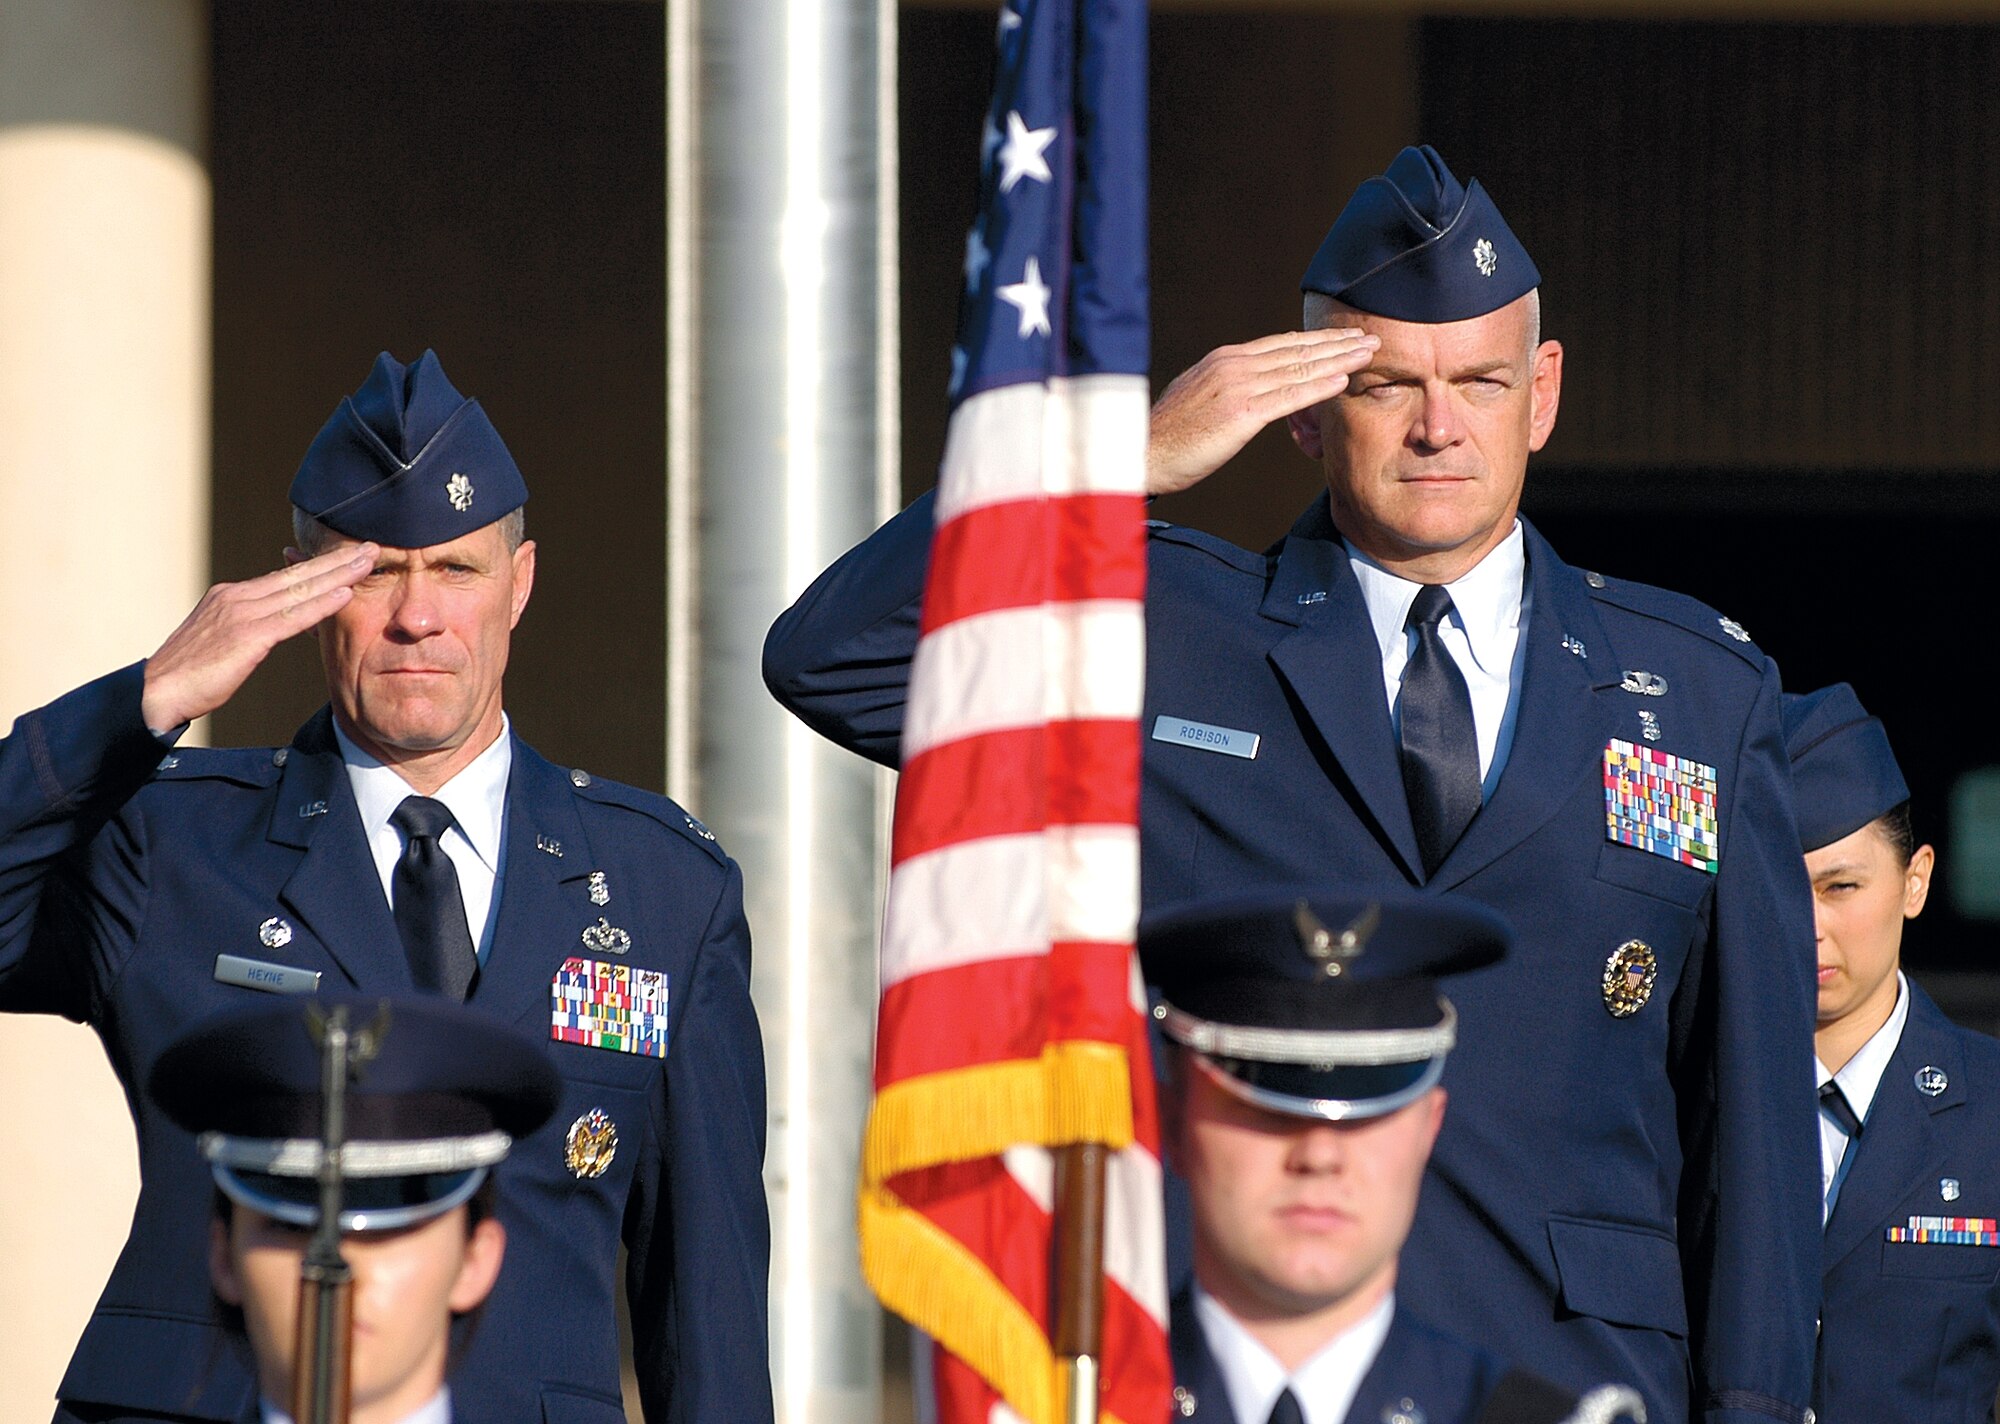 As the national anthem plays, outgoing 72nd Medical Support Squadron Commander Lt. Col. Lorn Heyne, left, and incoming commander Lt. Col. Elmo Robison honor the flag during the July 6 change of command ceremony. (Air Force photo by Margo Wright
